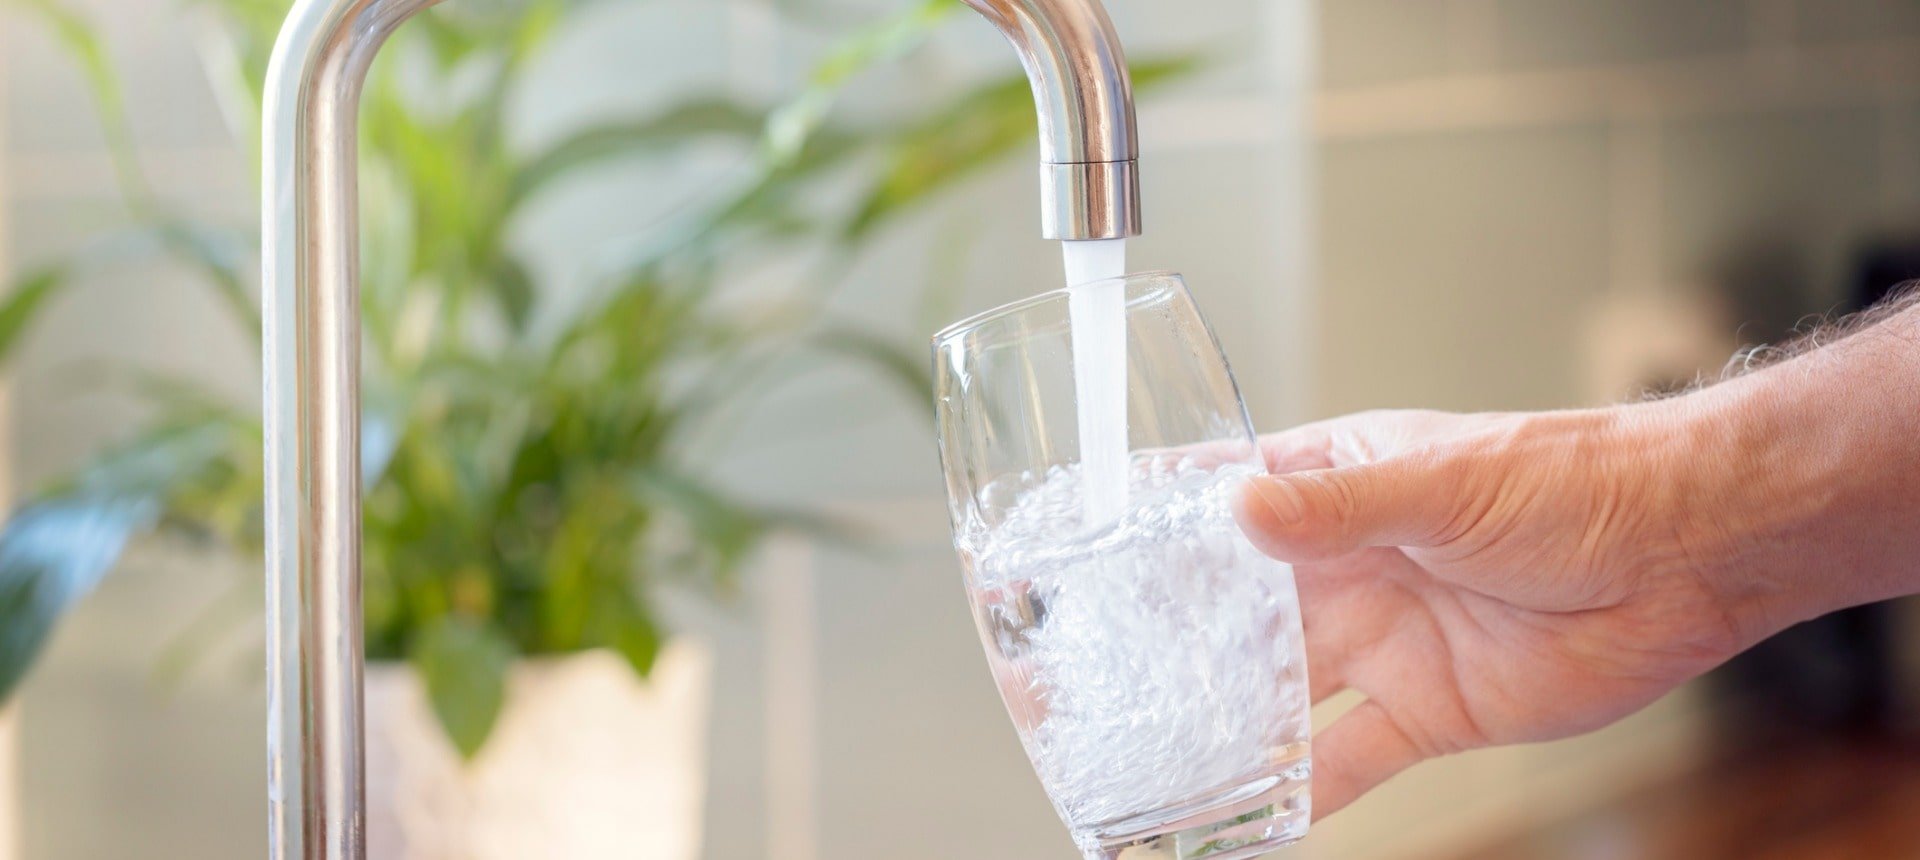 filling-up-a-glass-with-drinking-water-from-kitchen-tap-picture-id1204637747-min